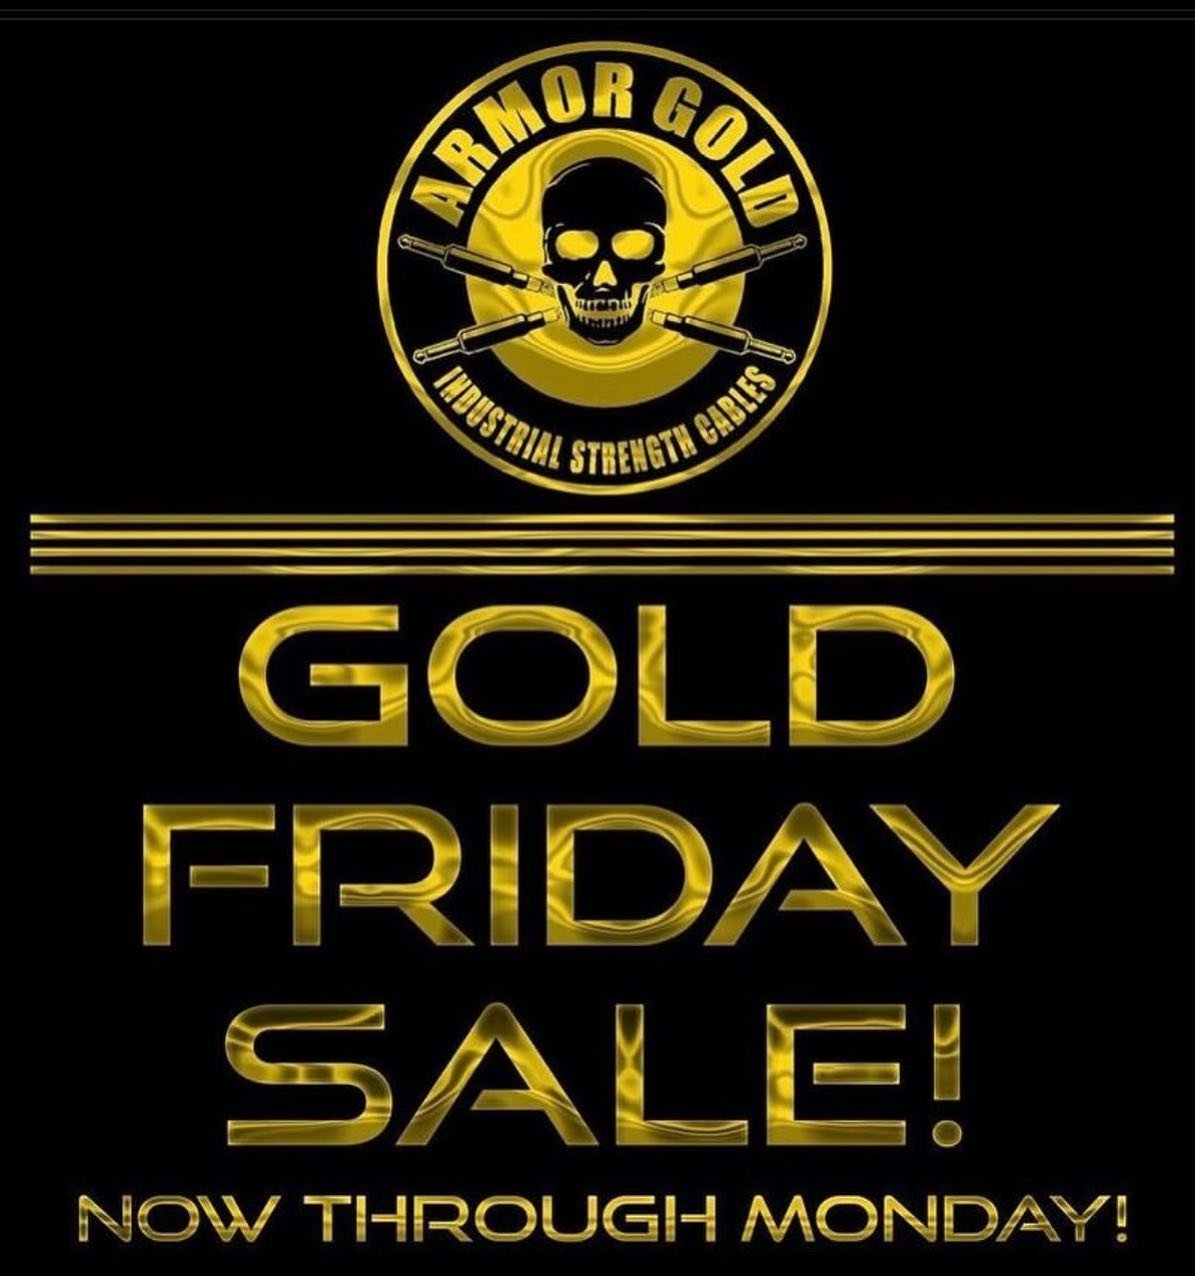 GOLD FRIDAY sale going on now!! 20% off site wide!! Enter &ldquo;GOLDFRIDAY&rdquo; when checking out. www.armorgoldcables.com #armorgoldcables #guitarplayer #bassplayer #rockguitar #rockguitarist